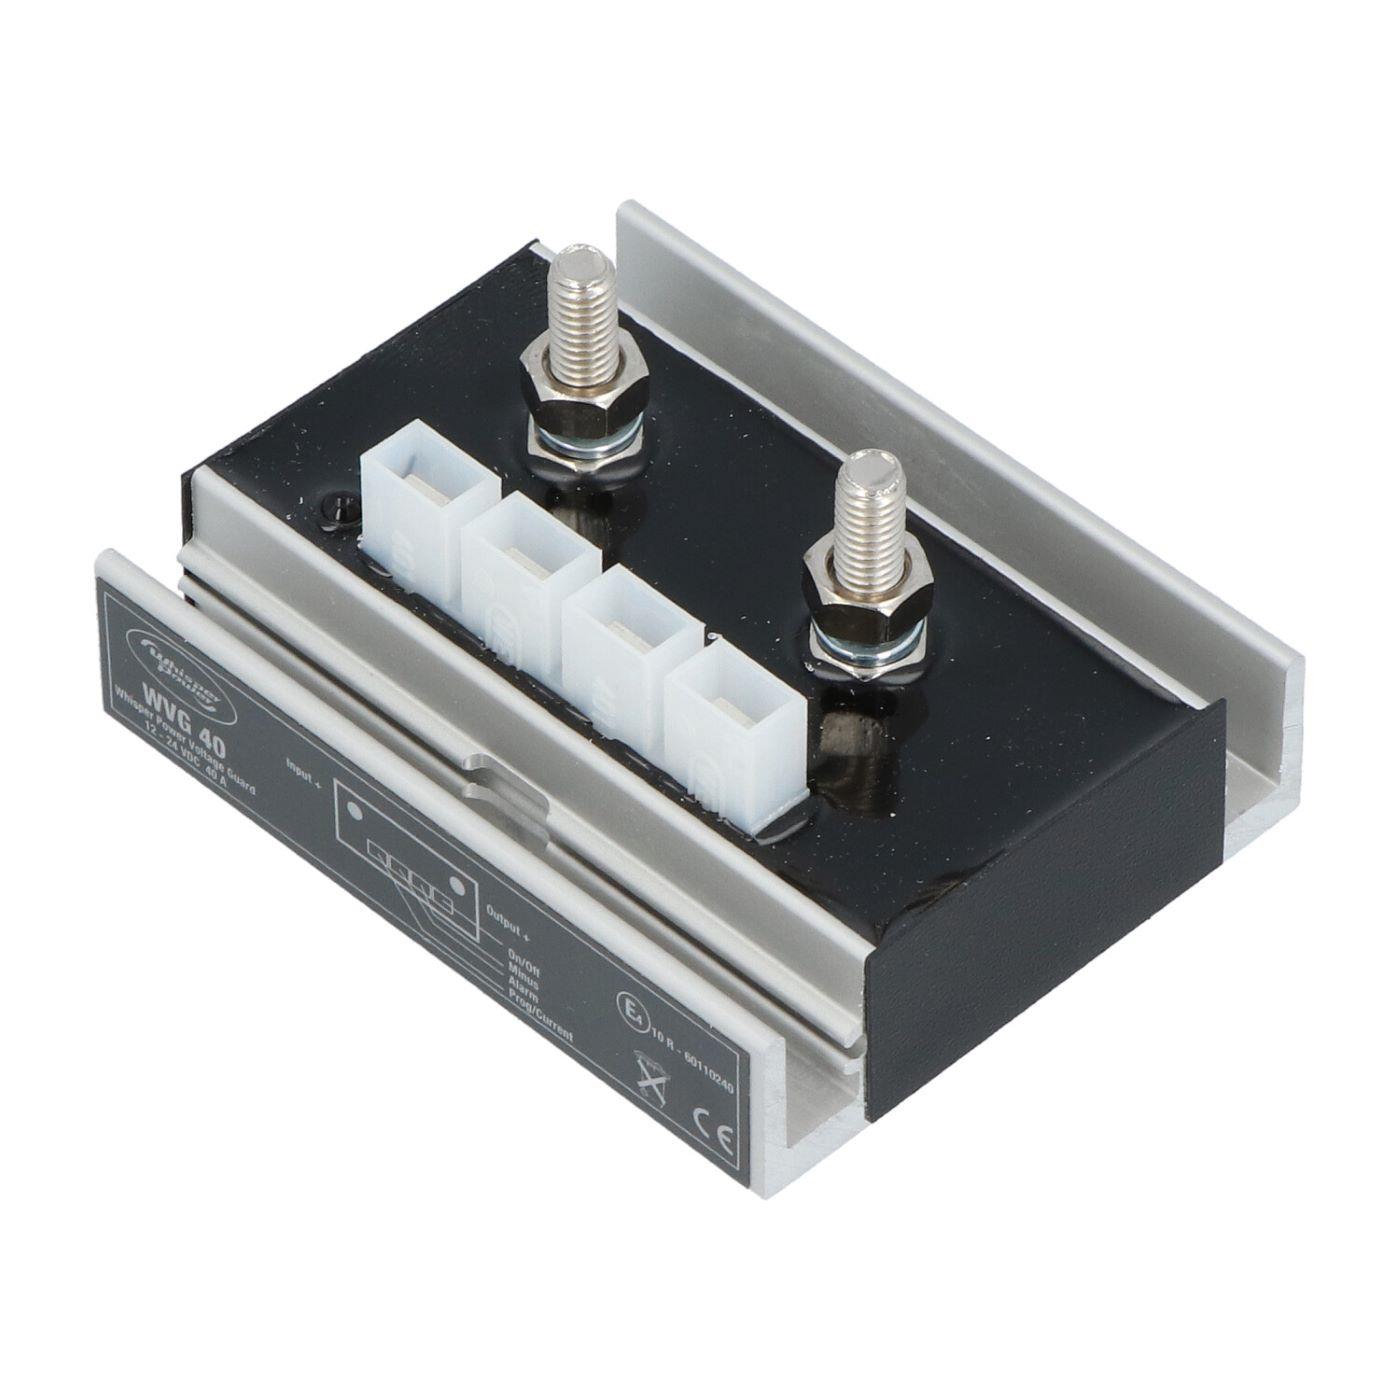 WhisperPower WVG 40 Voltage Guard 12-24V DC / 40 A Programmable